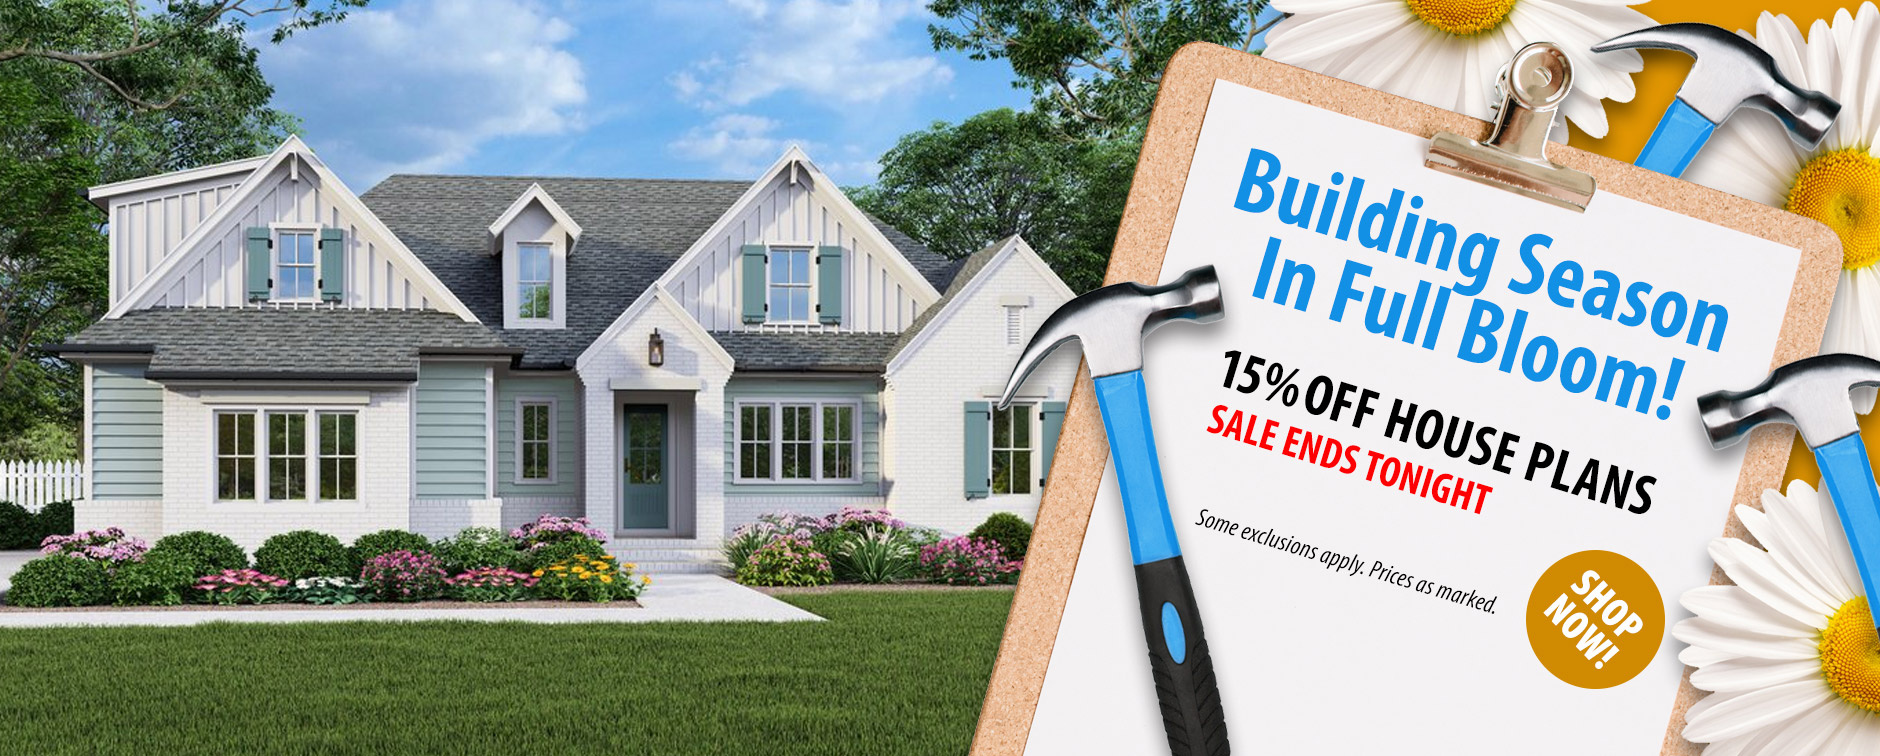 Last Day to Enjoy 15% Off Thousands of House Plans